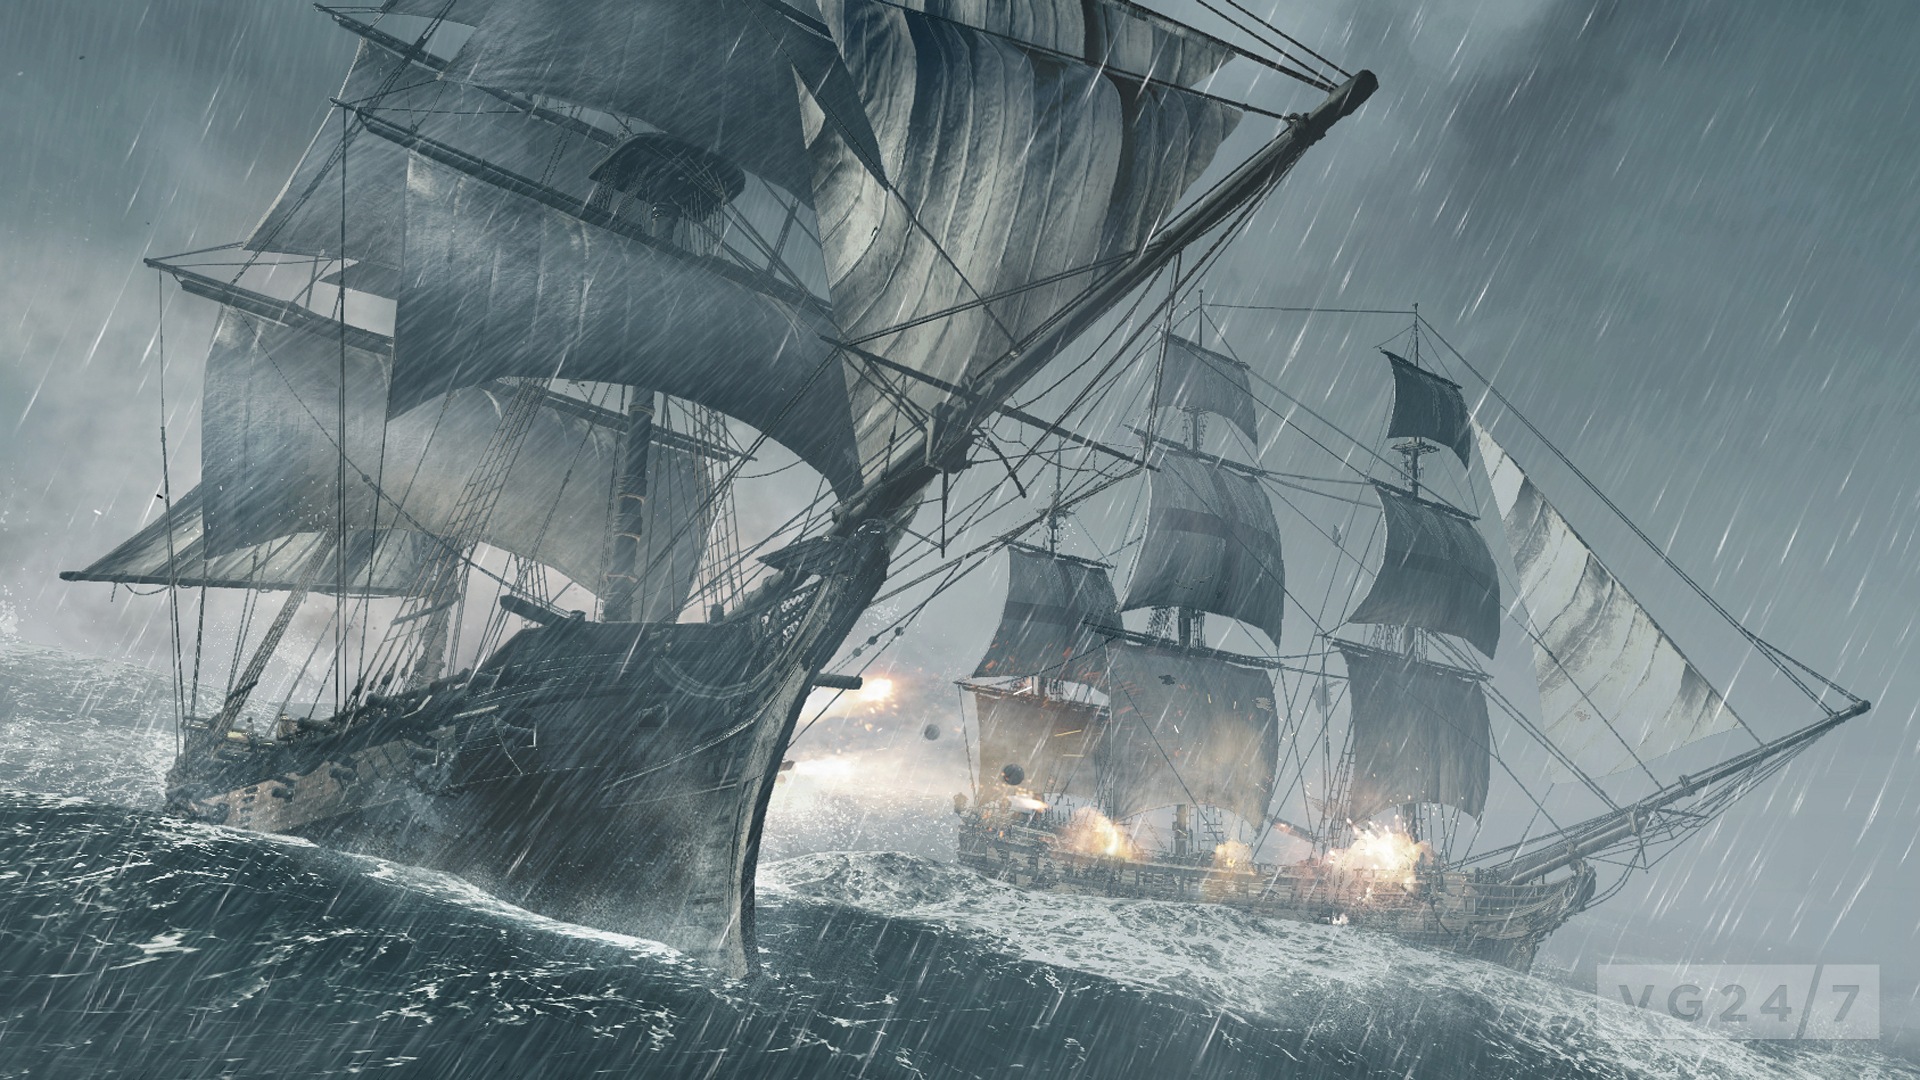 Creed IV Assassin: Black Flag HD wallpapers #19 - 1920x1080